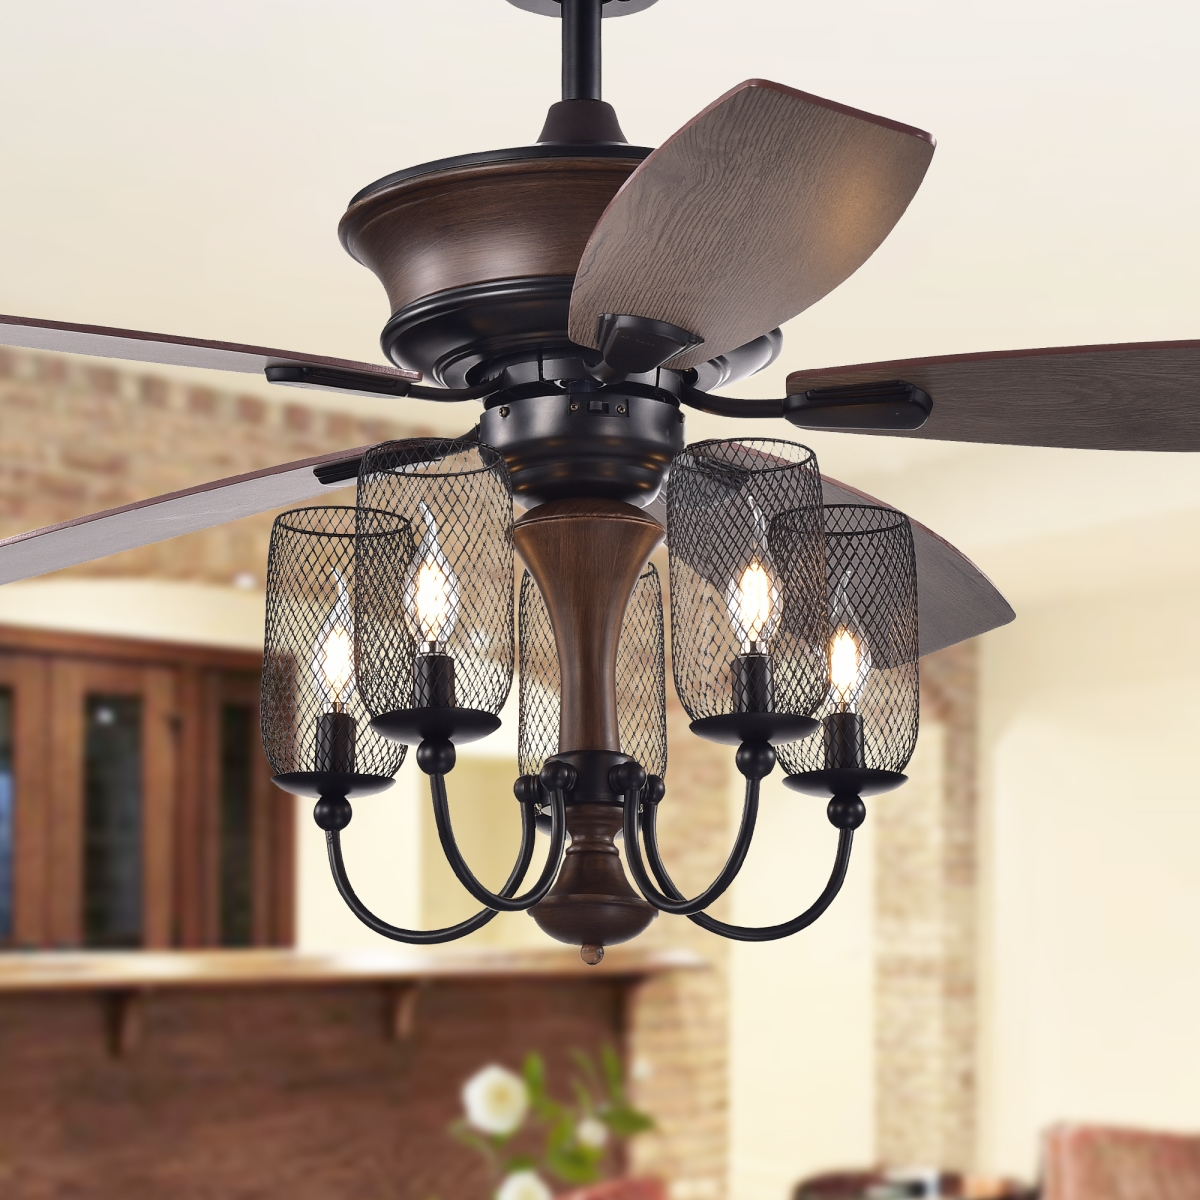 Cfl-8412remo-iw 52 In. Slatin 5-light Lighted Ceiling Fan With Mesh Shade Candelabra Chandelier, Faux Wood & Black